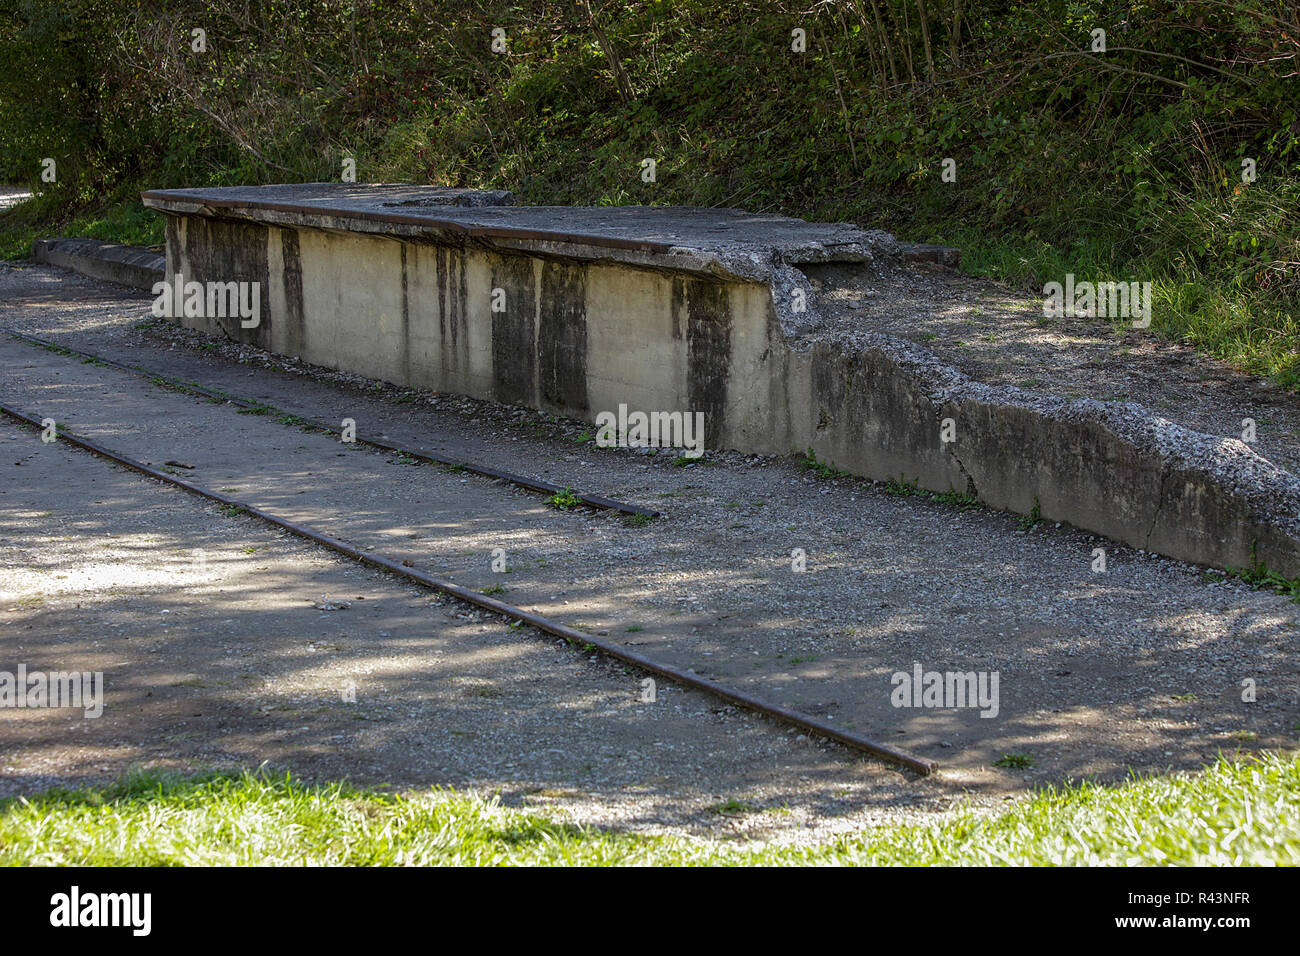 Within the boundary of Dachau Concentration Camp in Germany, viewed here is the end of the line for many undeserving innocent people. Stock Photo